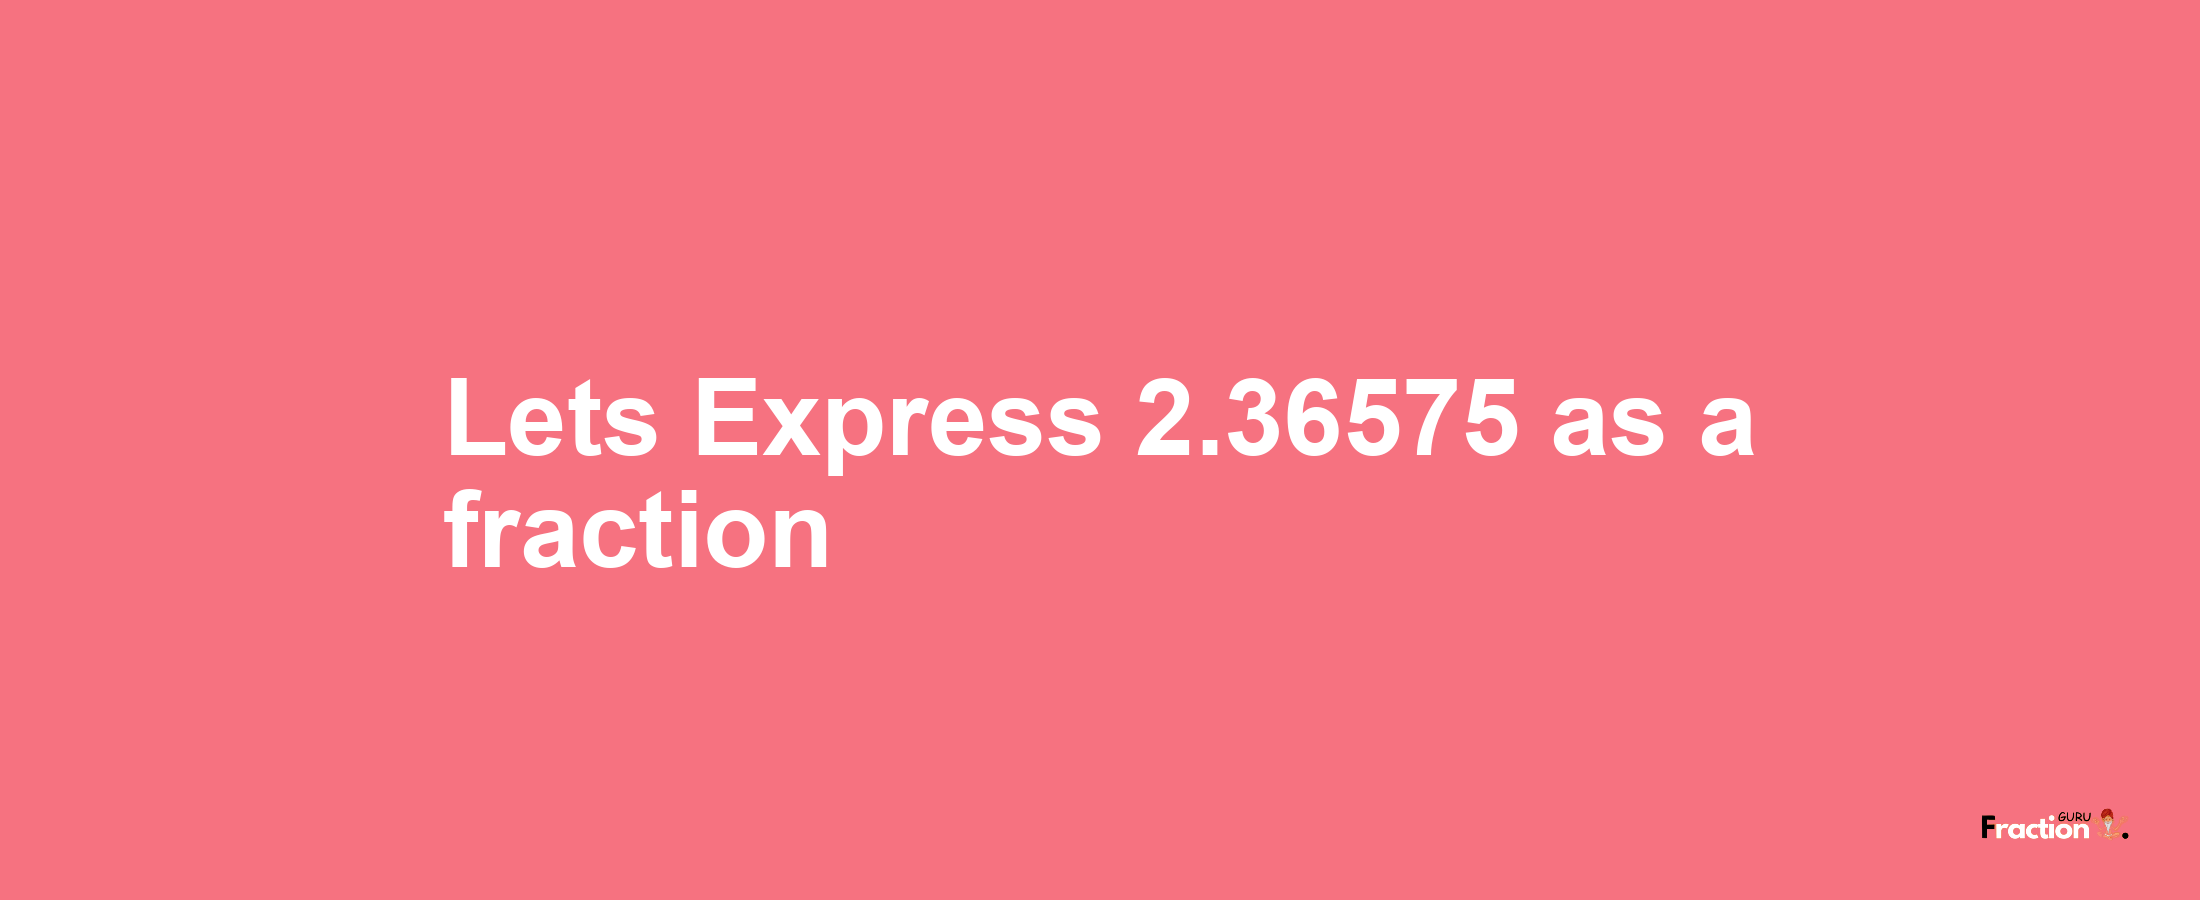 Lets Express 2.36575 as afraction